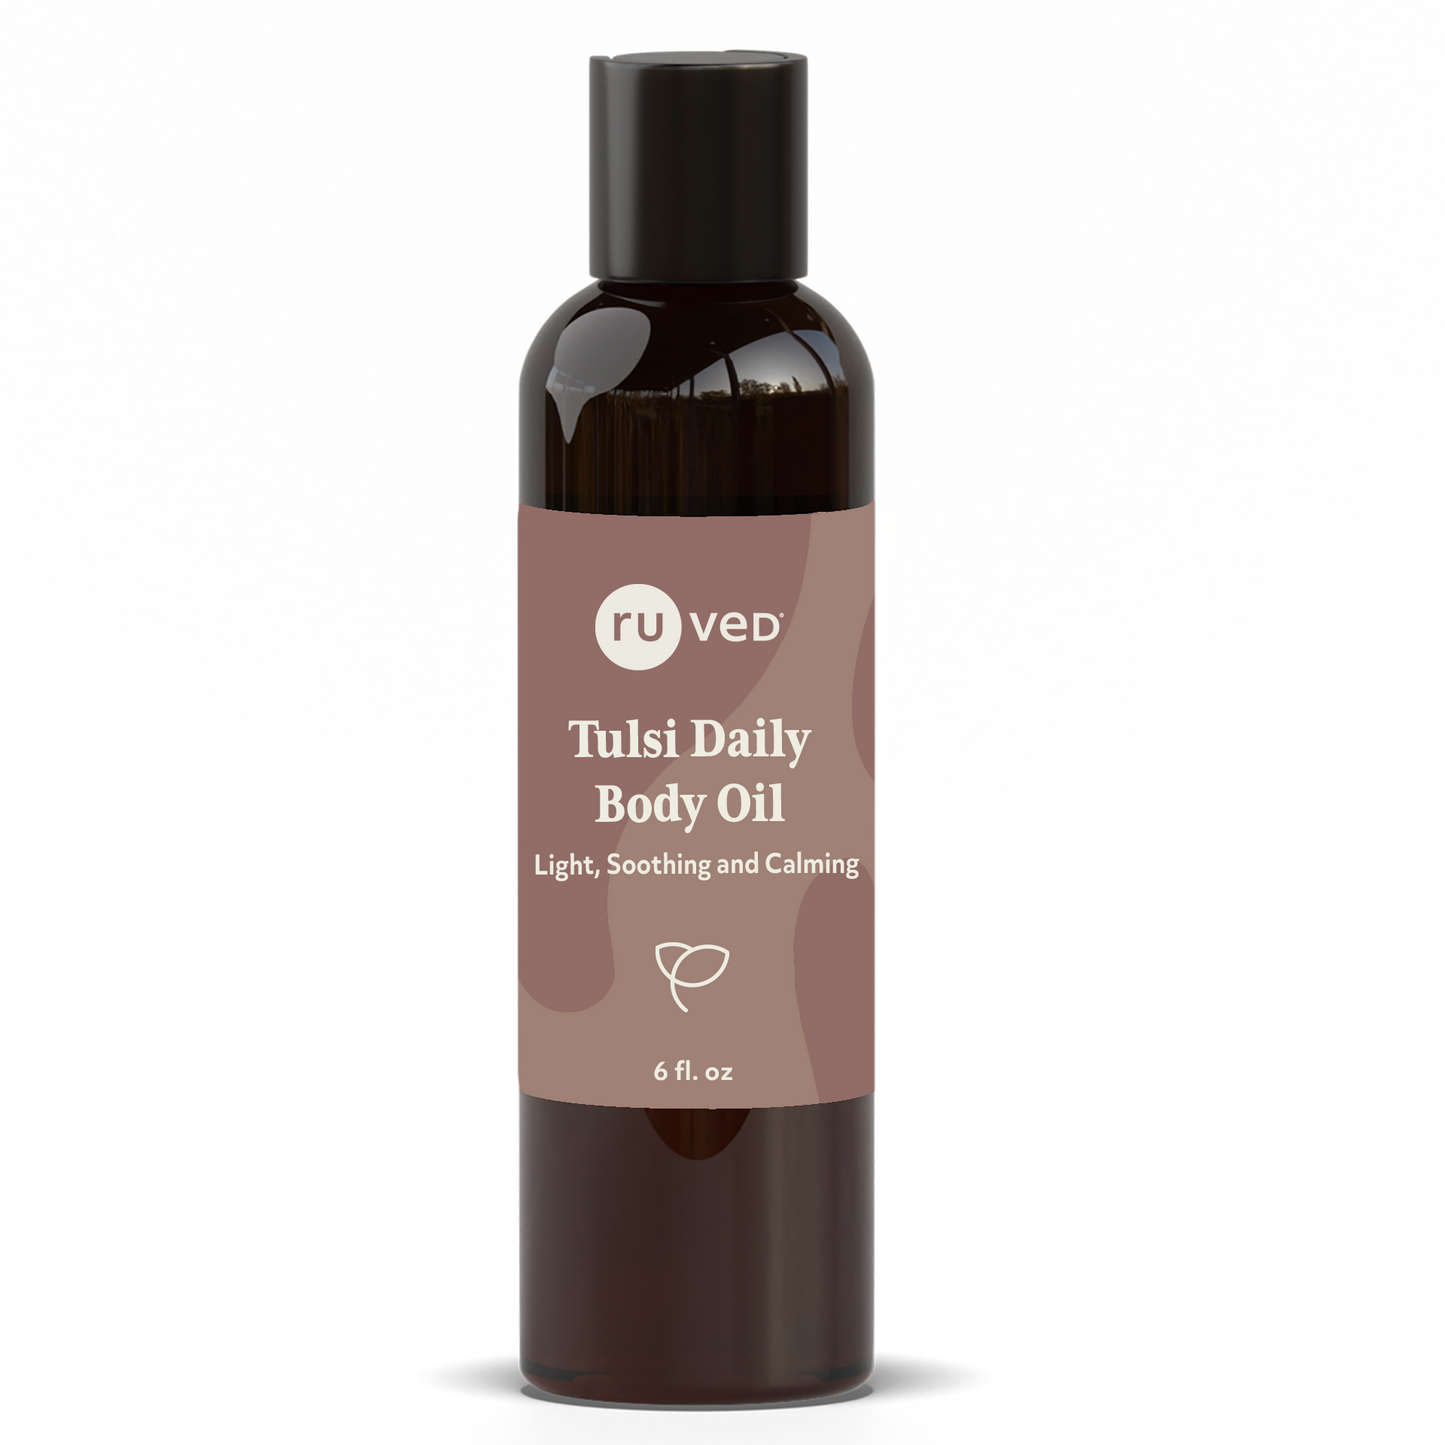 Tulsi Daily Body Oil bottle front by ruved herbal supplements and ayush herbs